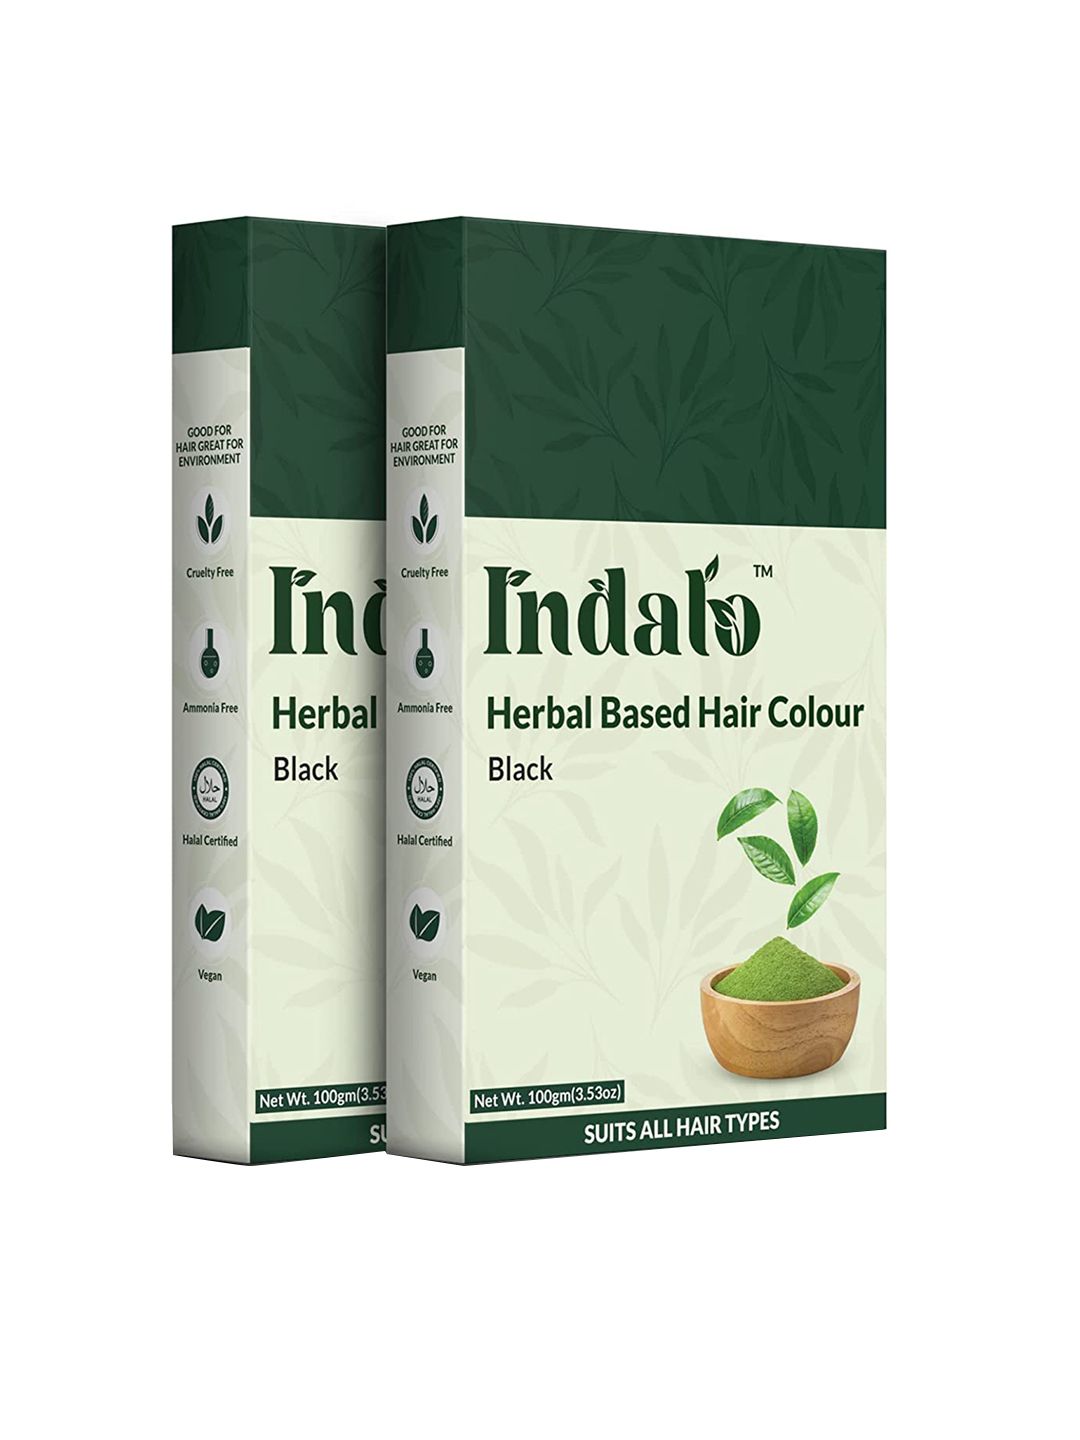 INDALO Set of 2 No Ammonia Herbal Based Hair Colour with Amla and Brahmi 100g Each - Black Price in India